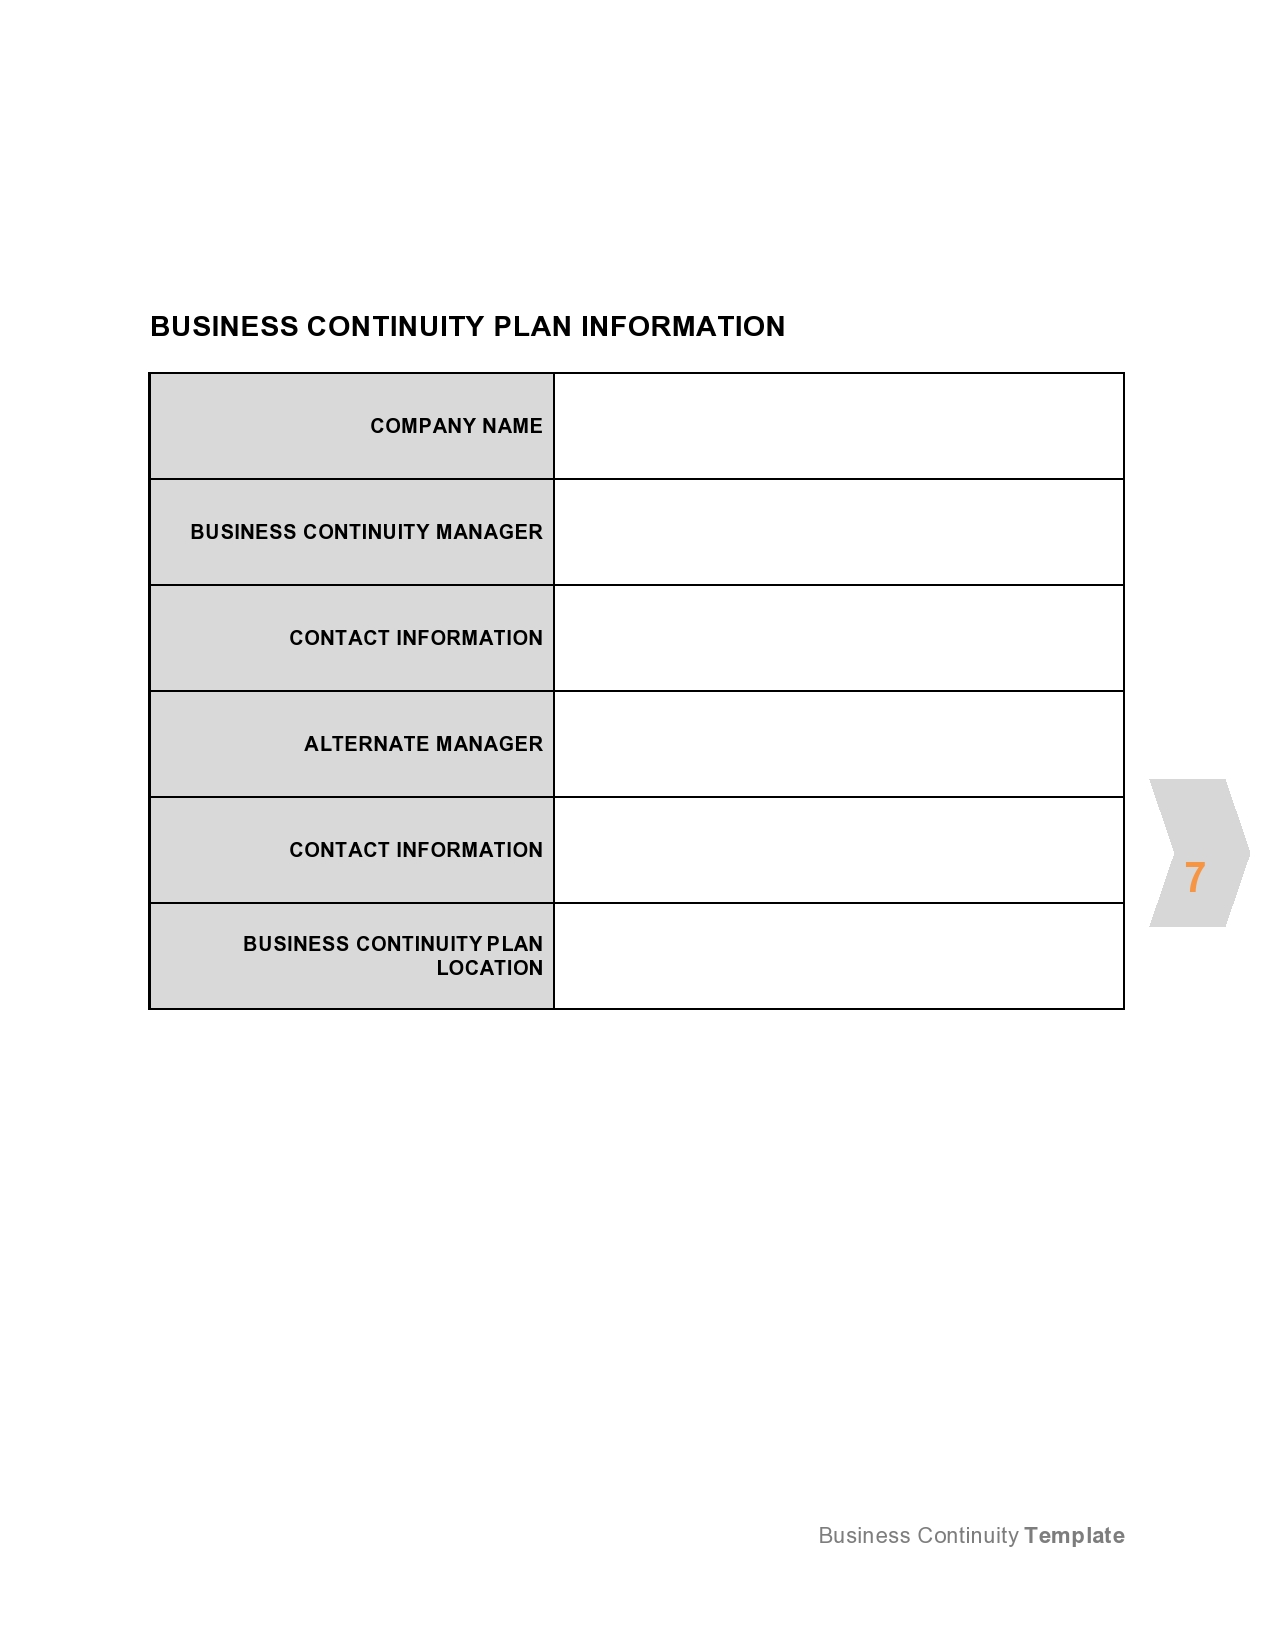 Free business continuity plan template 14